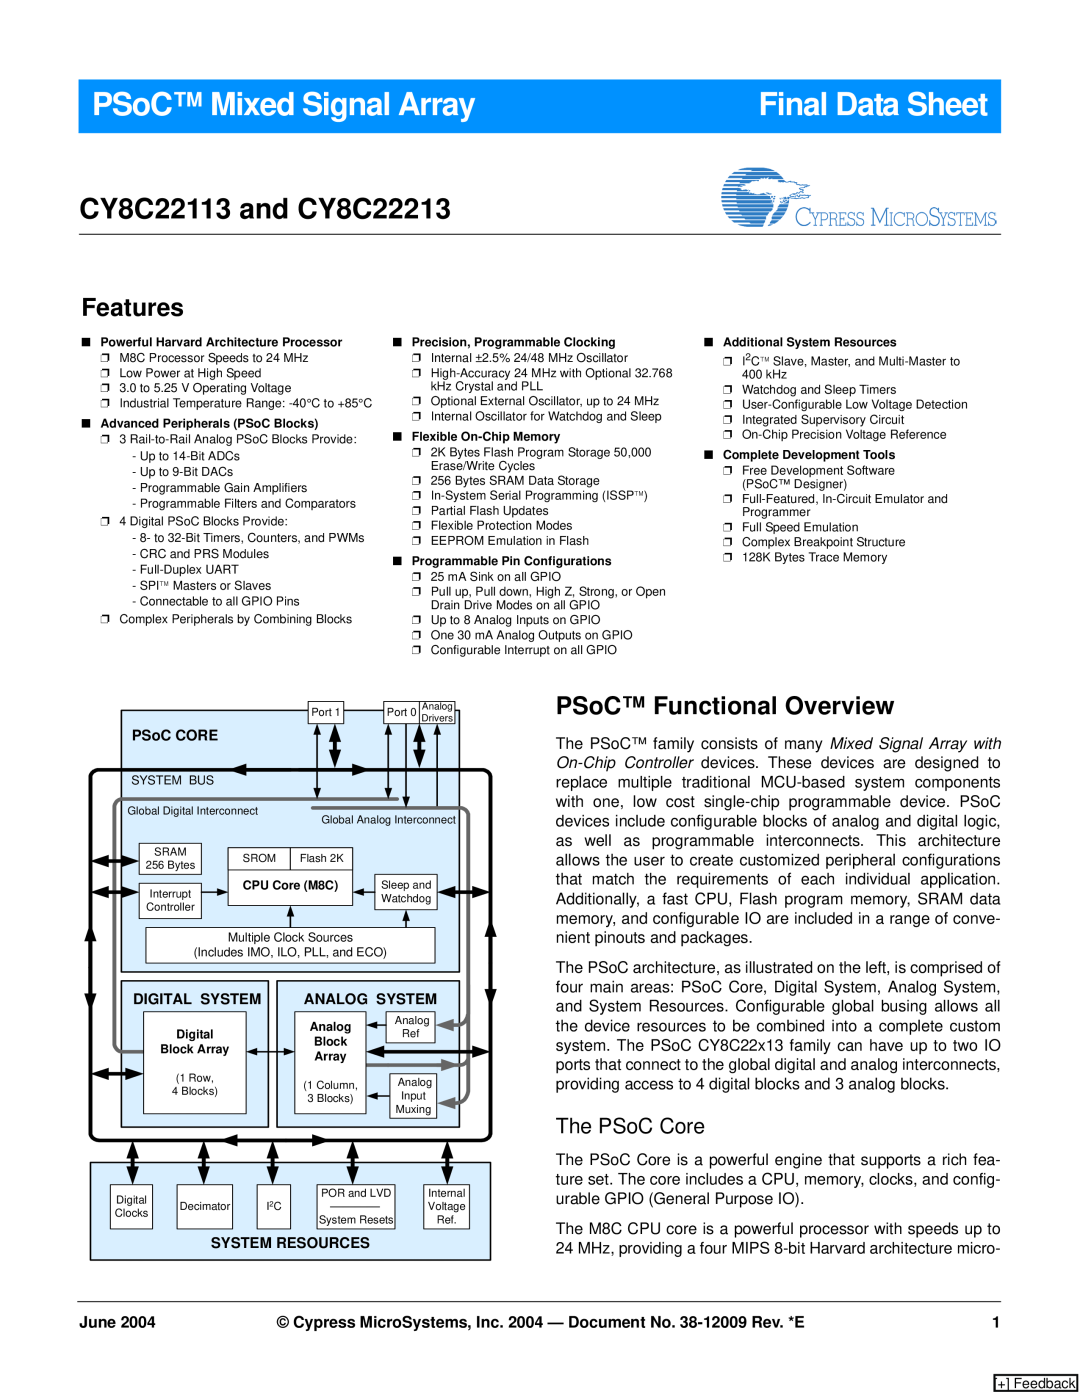 Cypress CY8C22213, CY8C22113 manual Features, PSoC Functional Overview, The PSoC Core, June, PSoC Mixed Signal Array 